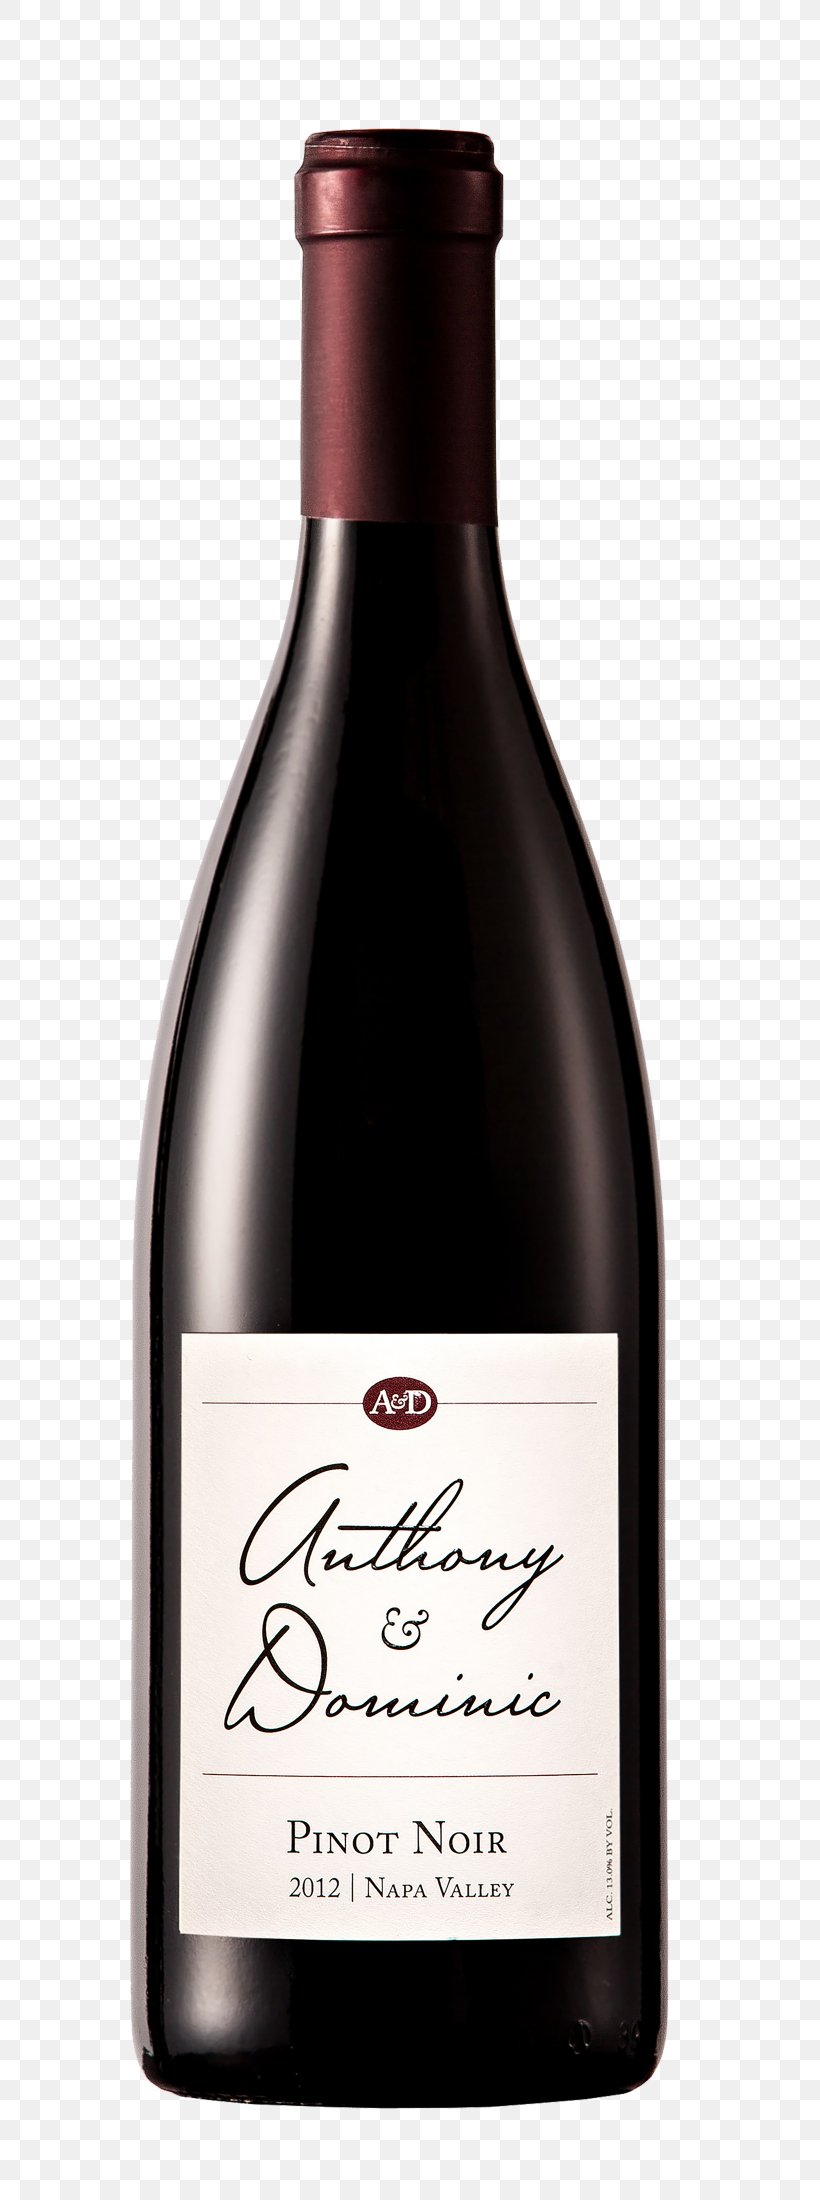 Red Wine Martin Ray Winery Pinot Noir Shiraz, PNG, 2460x6600px, Red Wine, Alcoholic Beverage, Bottle, Cabernet Sauvignon, Chardonnay Download Free